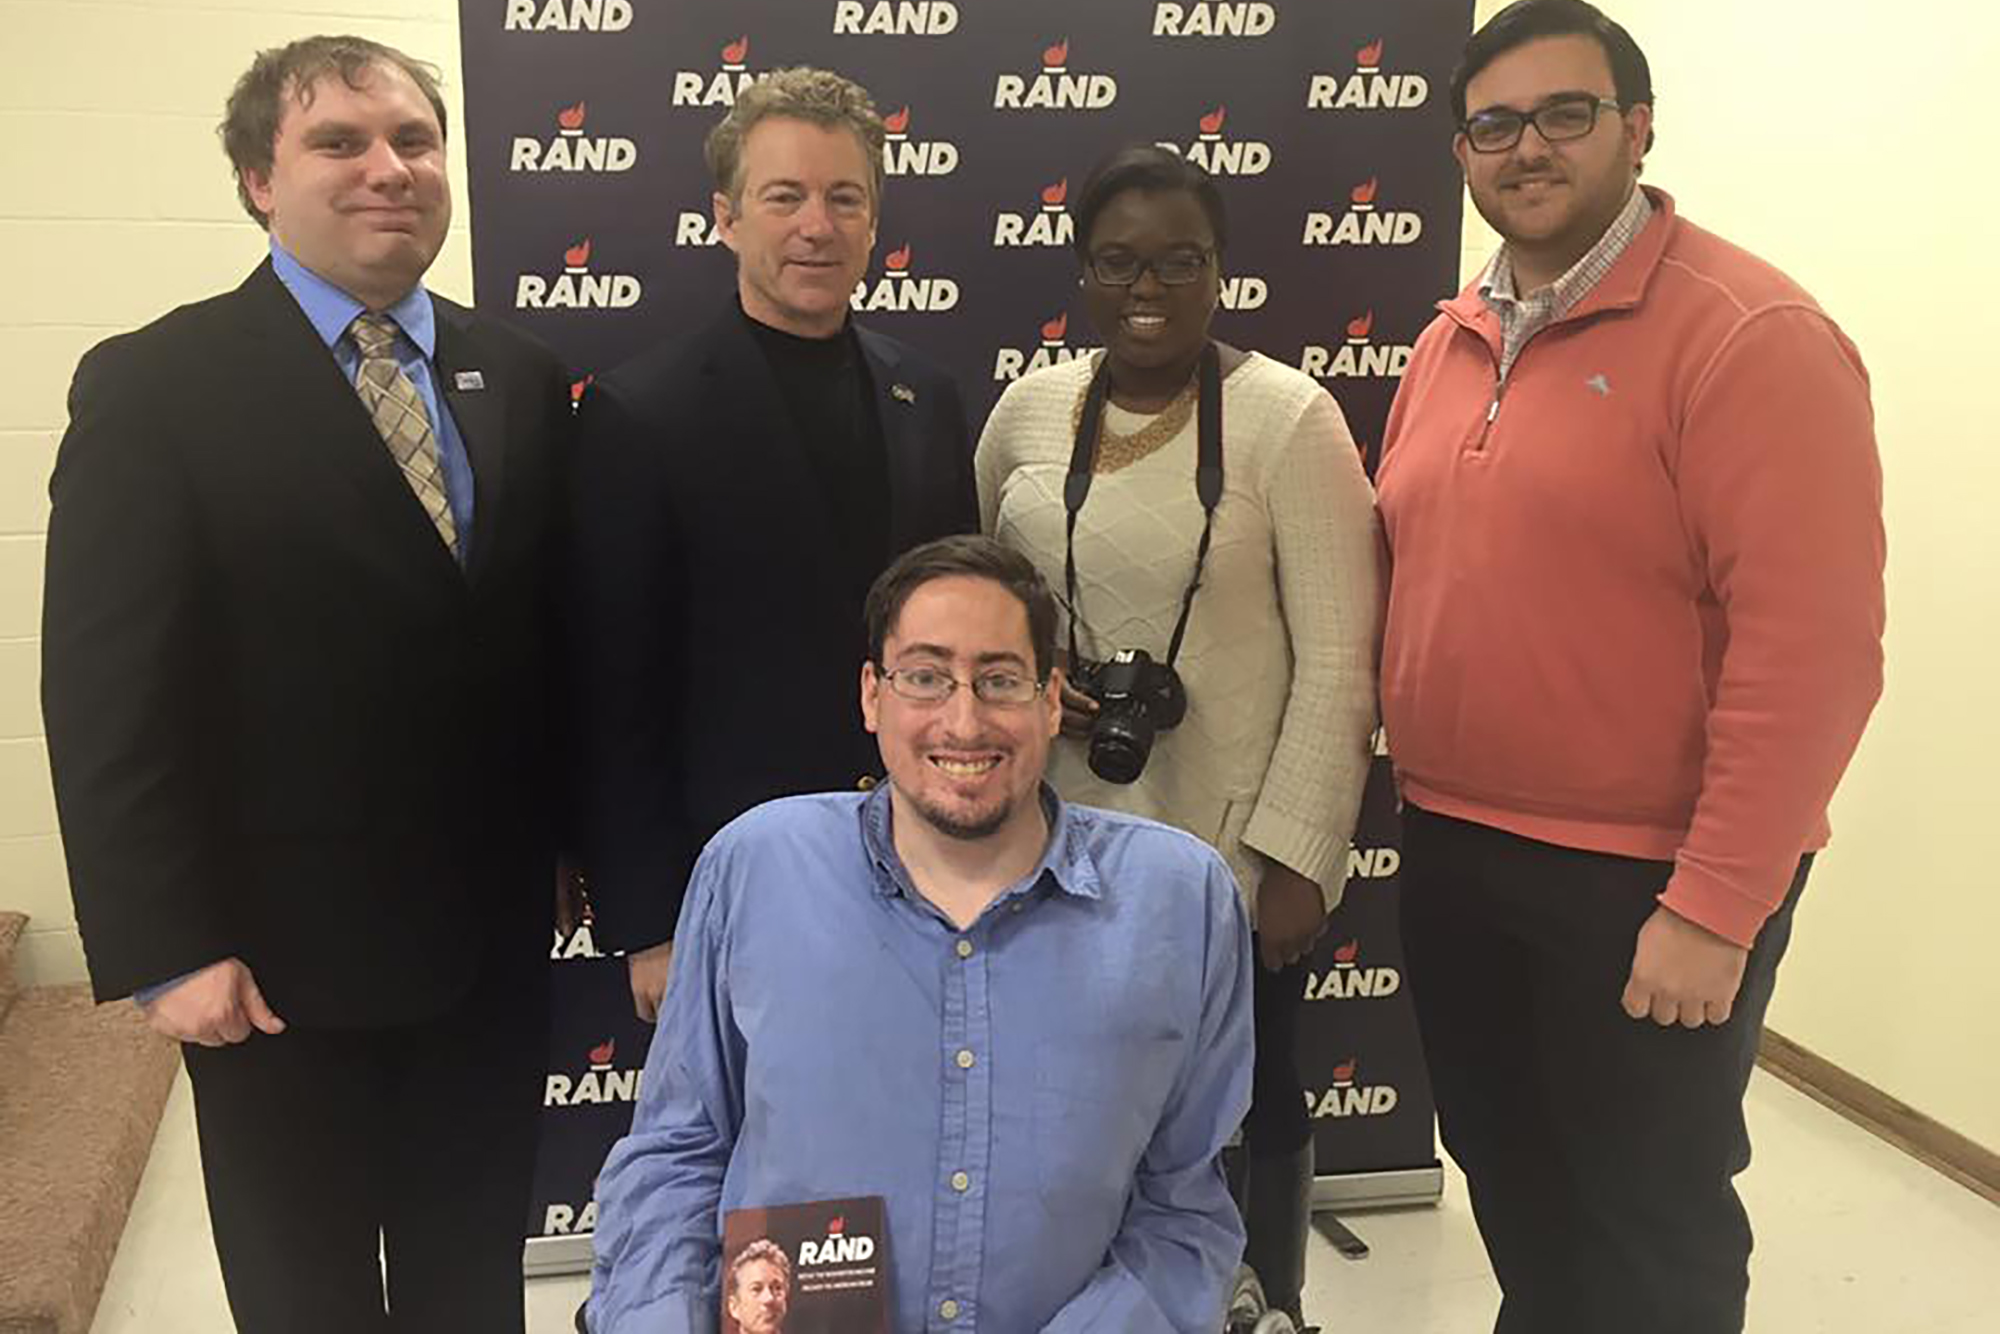 In January, James interviewed Sen. Rand Paul in New Hampshire.